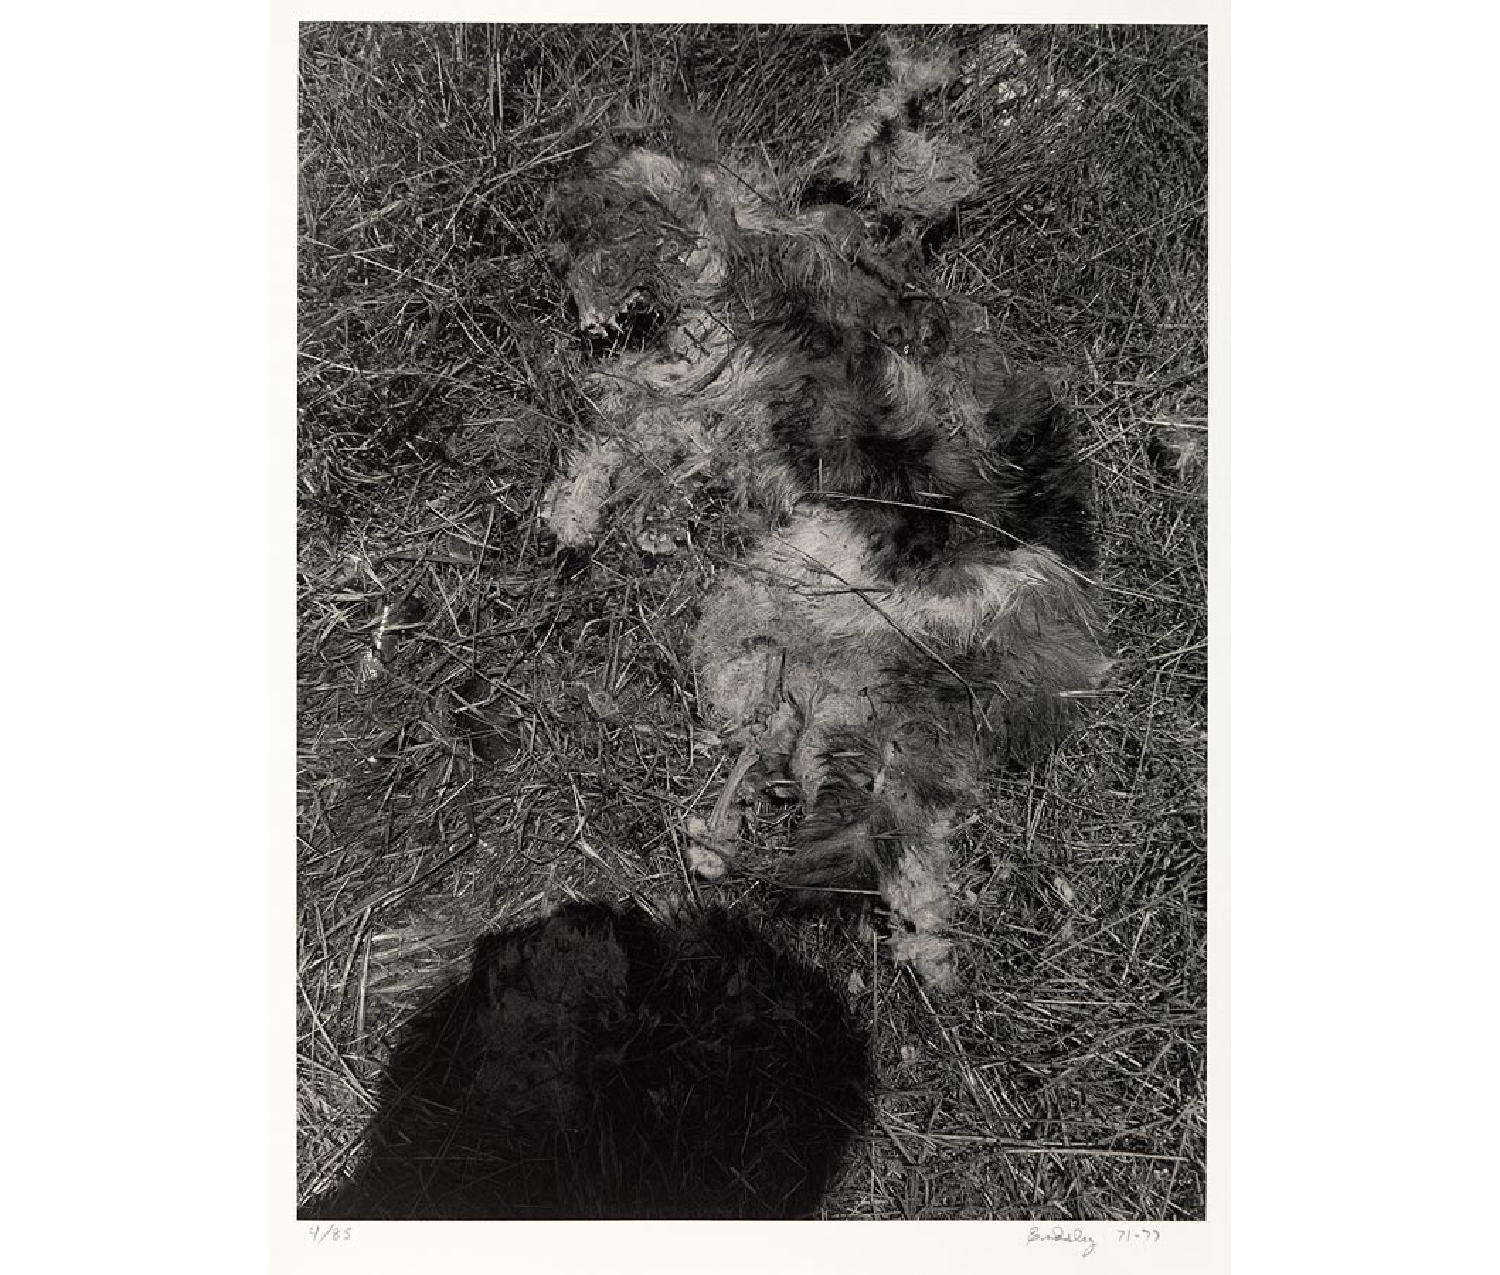 grassy area with fur and bones of desiccated animal and shadow of a person's head at bottom edge